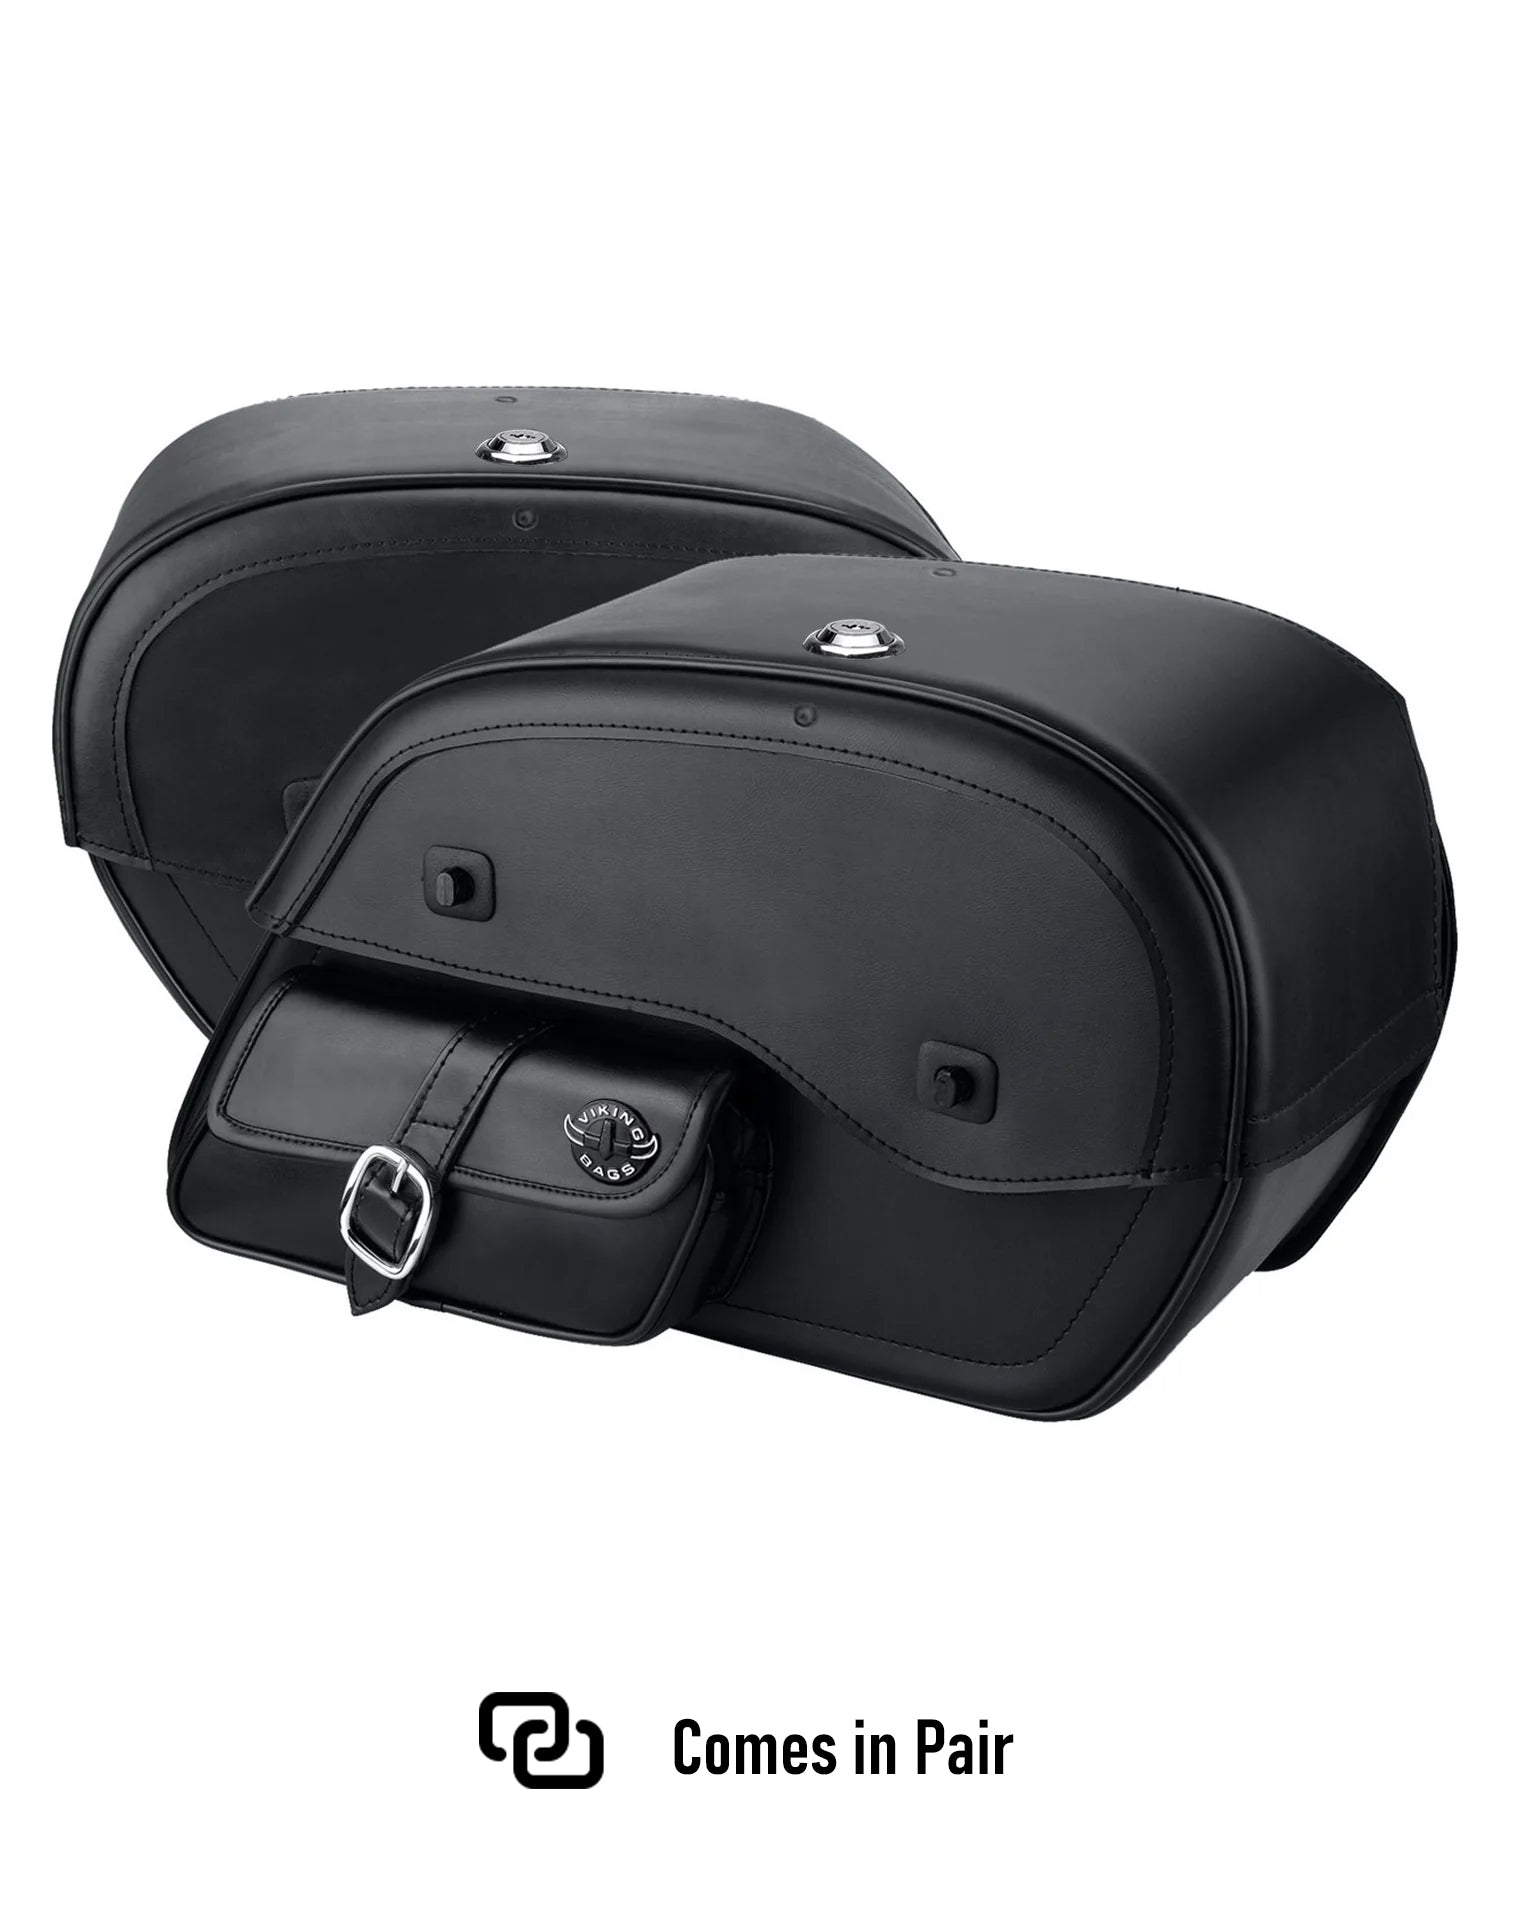 Viking Essential Side Pocket Large Yamaha Stratoliner Xv 1900 Leather Motorcycle Saddlebags Weather Resistant Bags Comes in Pair